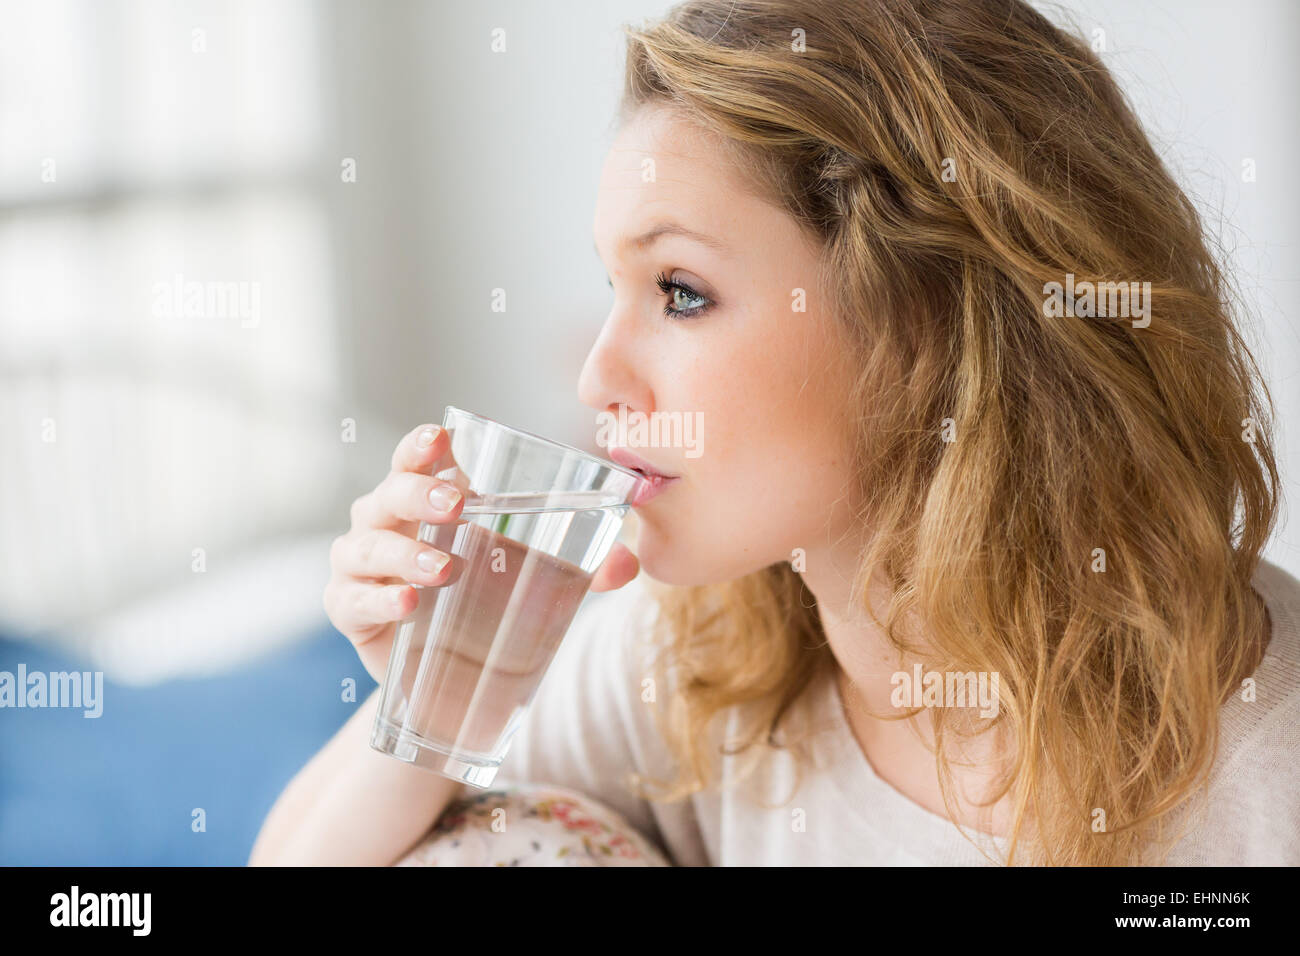 Woman drinking glass of water. Stock Photo